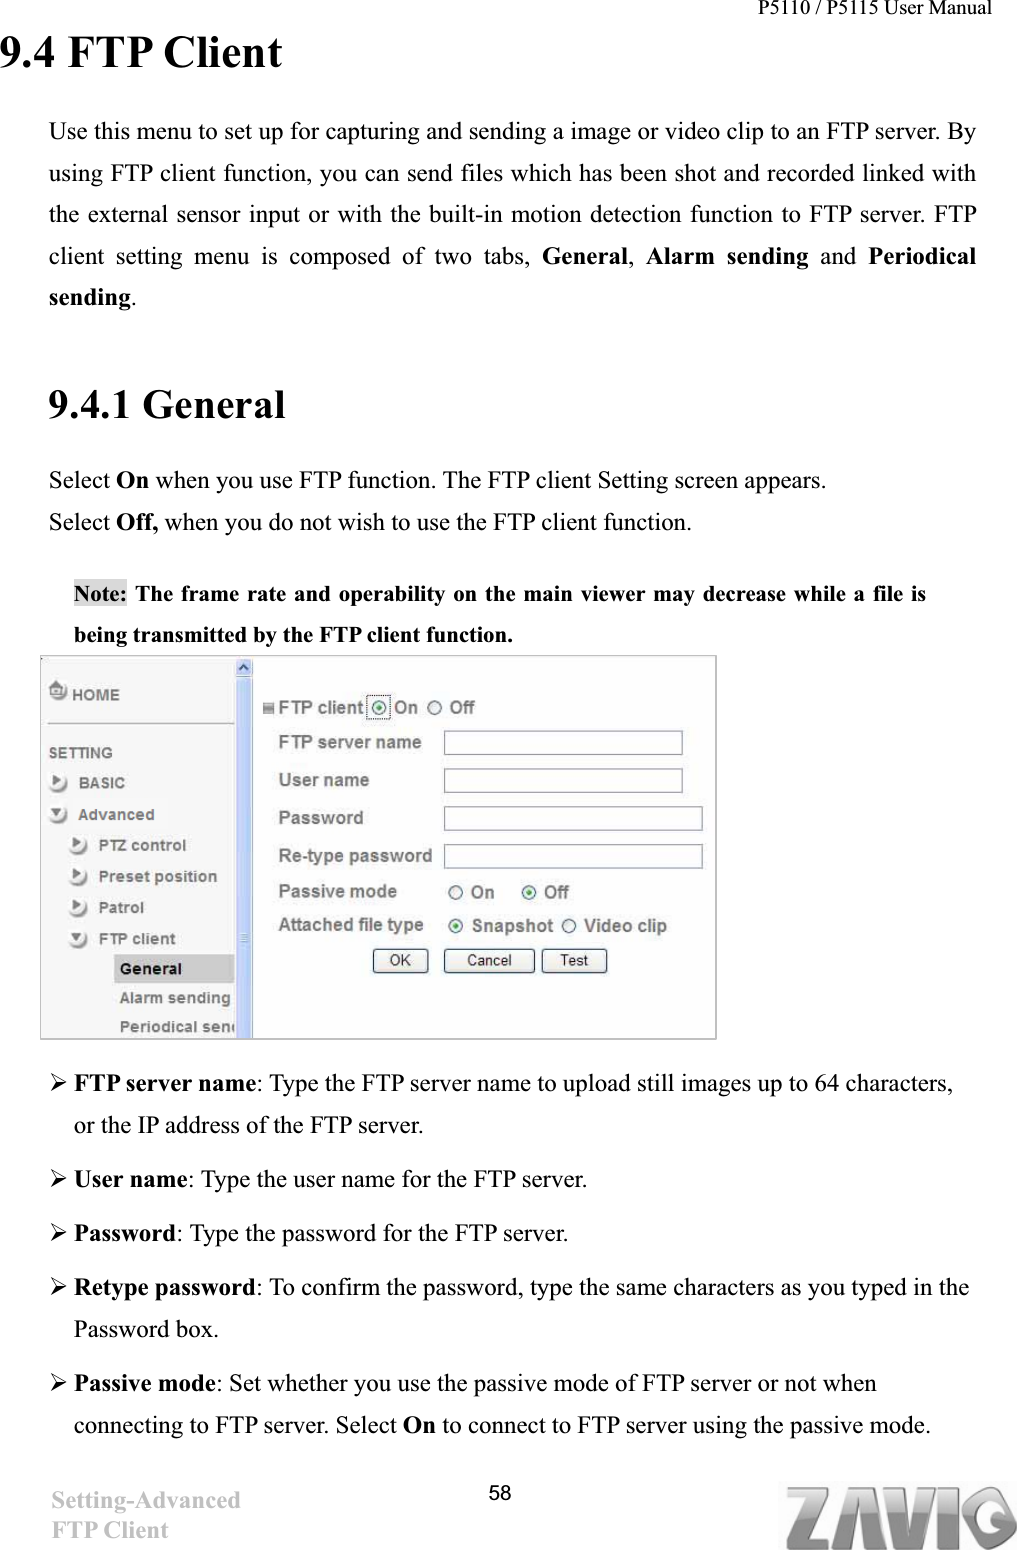 P5110 / P5115 User Manual   589.4 FTP Client Use this menu to set up for capturing and sending a image or video clip to an FTP server. By using FTP client function, you can send files which has been shot and recorded linked with the external sensor input or with the built-in motion detection function to FTP server. FTP client setting menu is composed of two tabs, General,Alarm sending and Periodicalsending.9.4.1 General Select On when you use FTP function. The FTP client Setting screen appears.   Select Off, when you do not wish to use the FTP client function.  Note: The frame rate and operability on the main viewer may decrease while a file is being transmitted by the FTP client function.   ¾FTP server name: Type the FTP server name to upload still images up to 64 characters, or the IP address of the FTP server. ¾User name: Type the user name for the FTP server. ¾Password: Type the password for the FTP server. ¾Retype password: To confirm the password, type the same characters as you typed in the Password box. ¾Passive mode: Set whether you use the passive mode of FTP server or not when connecting to FTP server. Select On to connect to FTP server using the passive mode. Setting-AdvancedFTP Client 